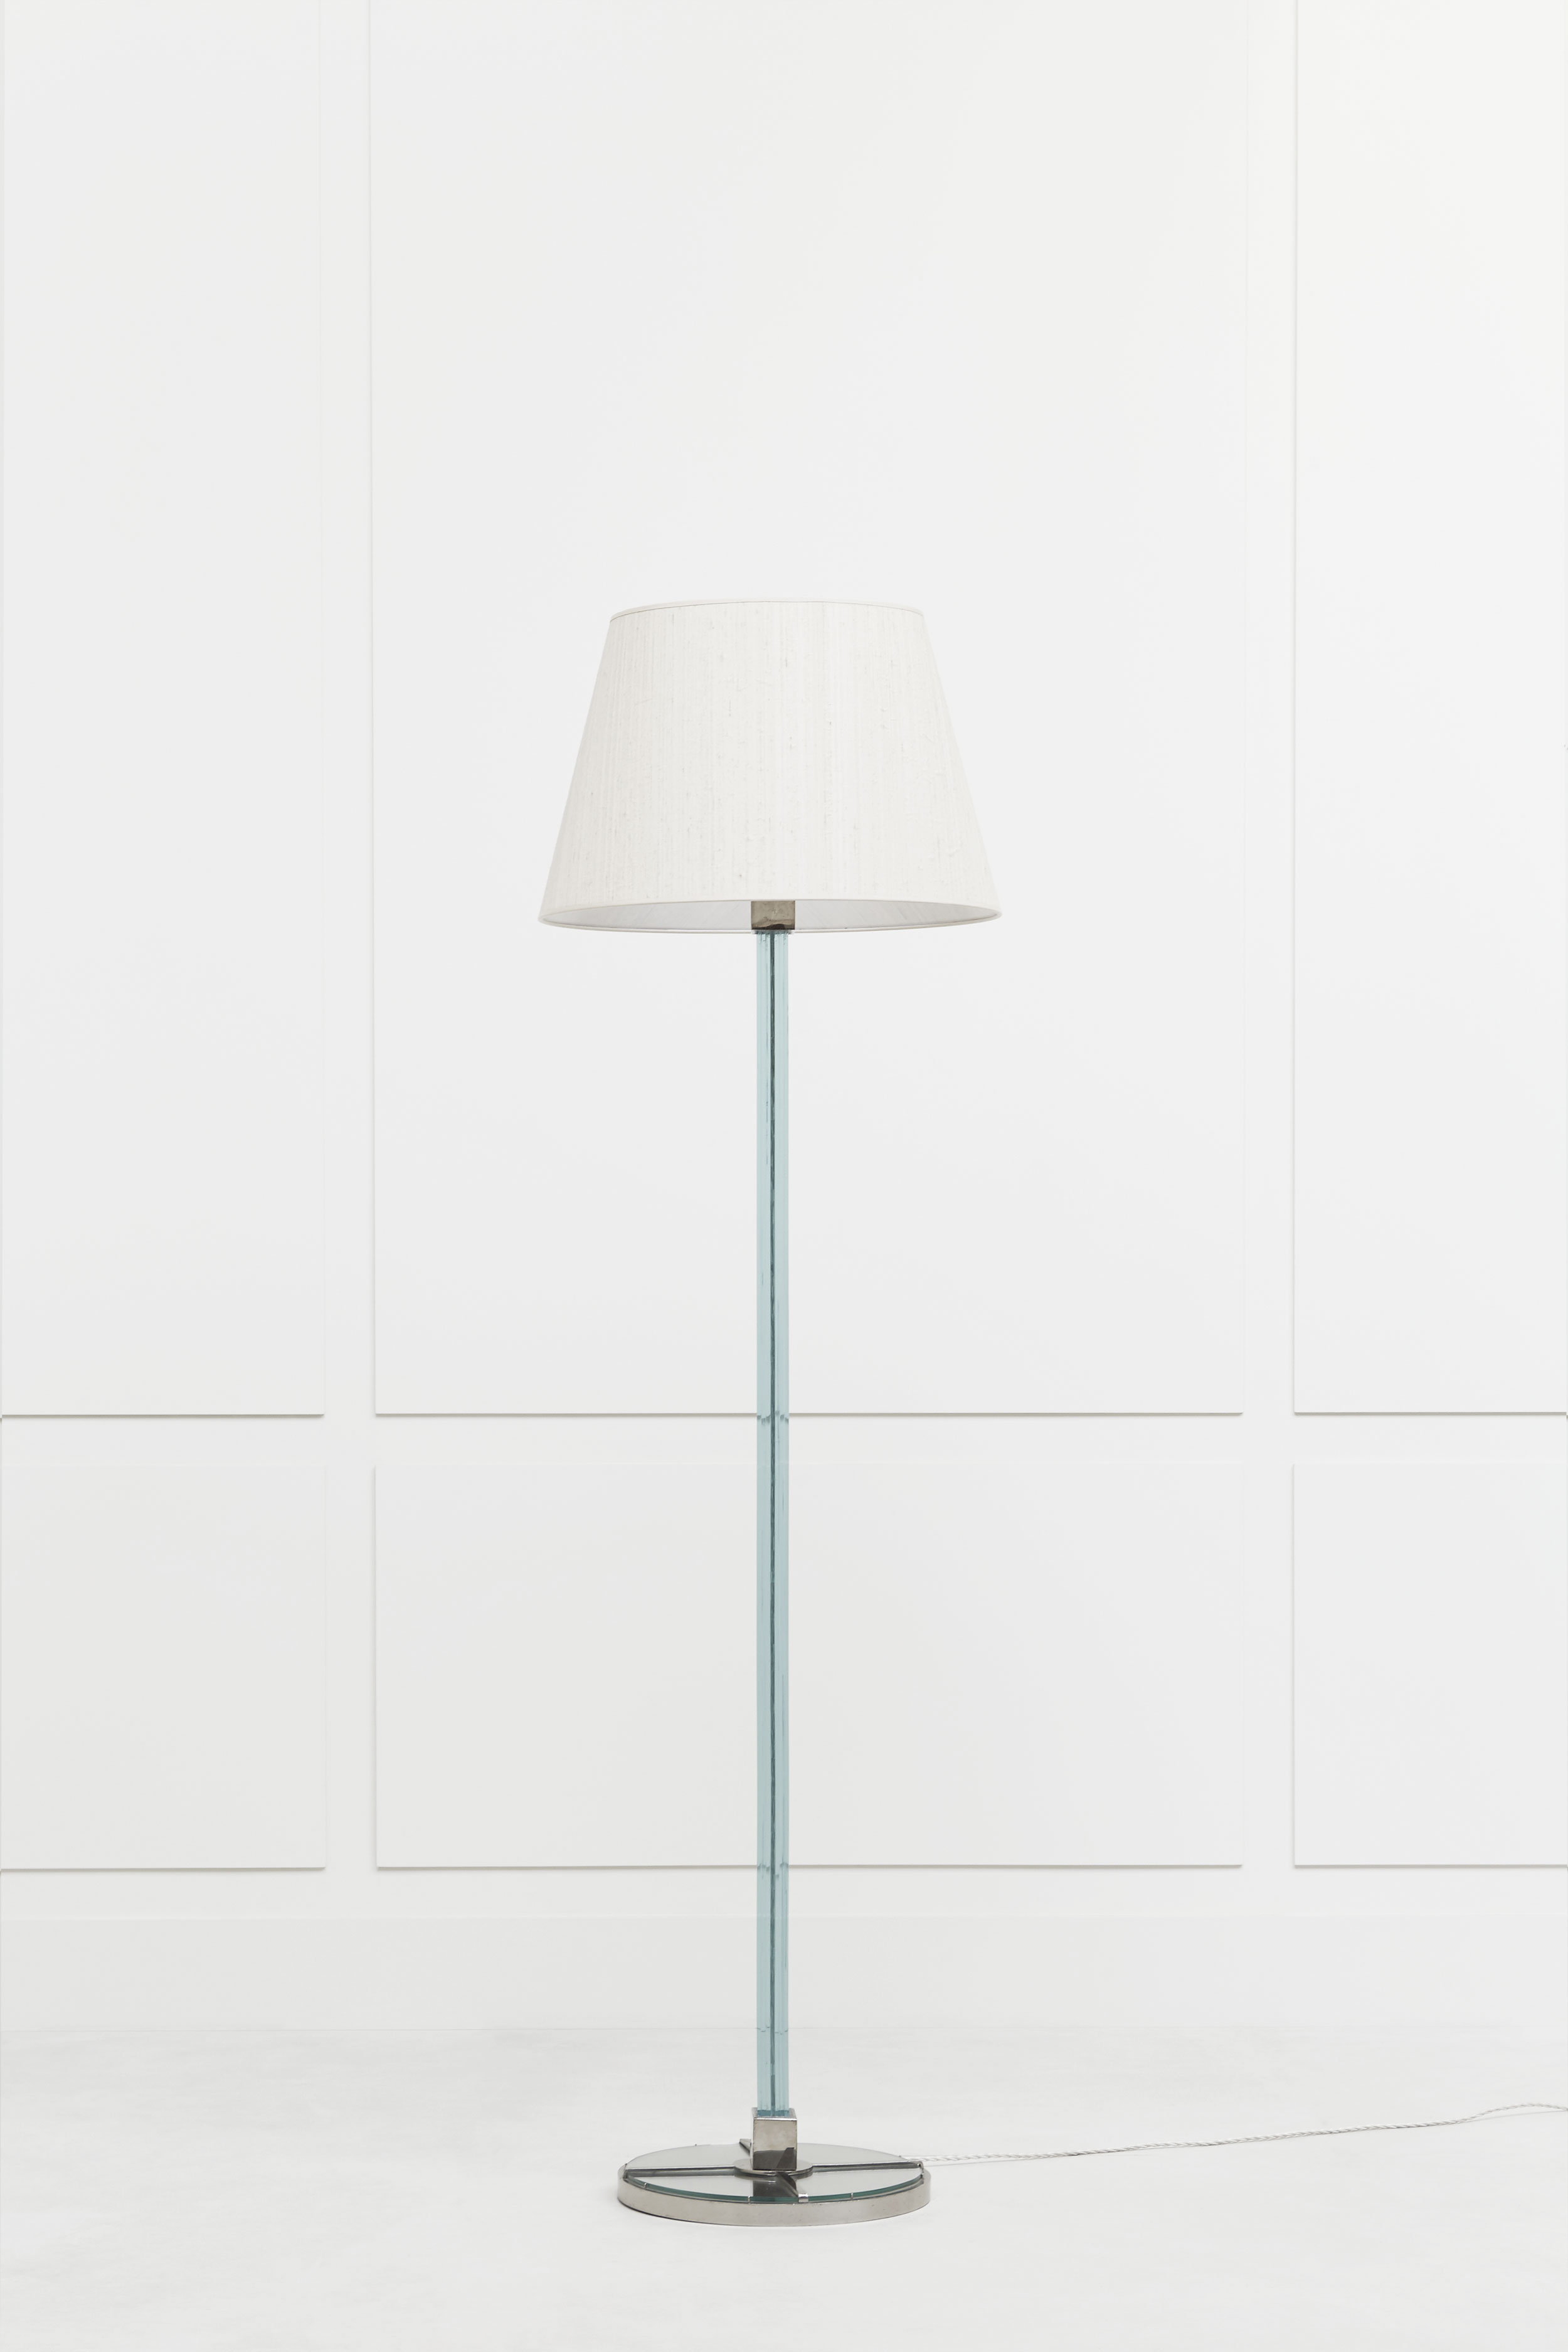 Syrie Maugham, Floor lamp, vue 02